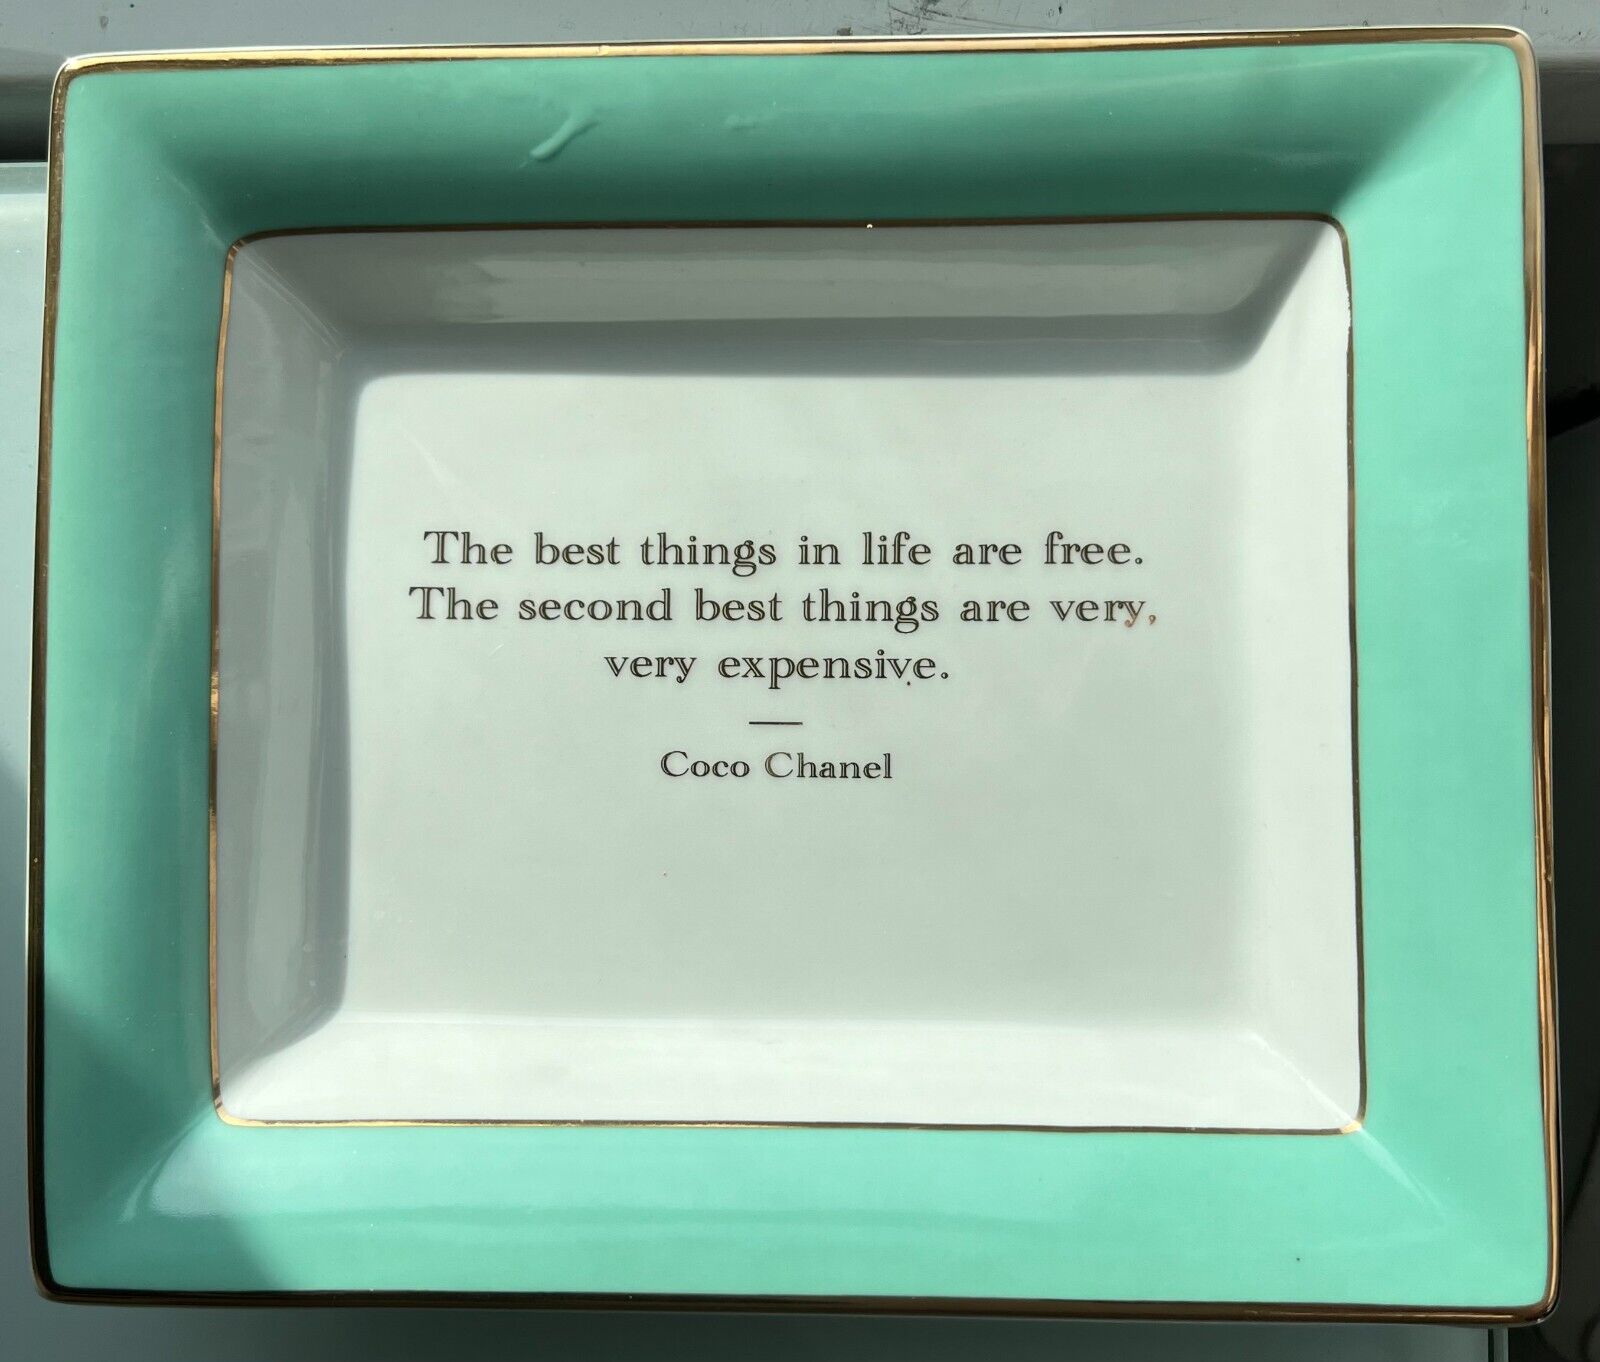 Coco Chanel Repartee Jewelry Tray, Teal and White, Porcelain, 7\